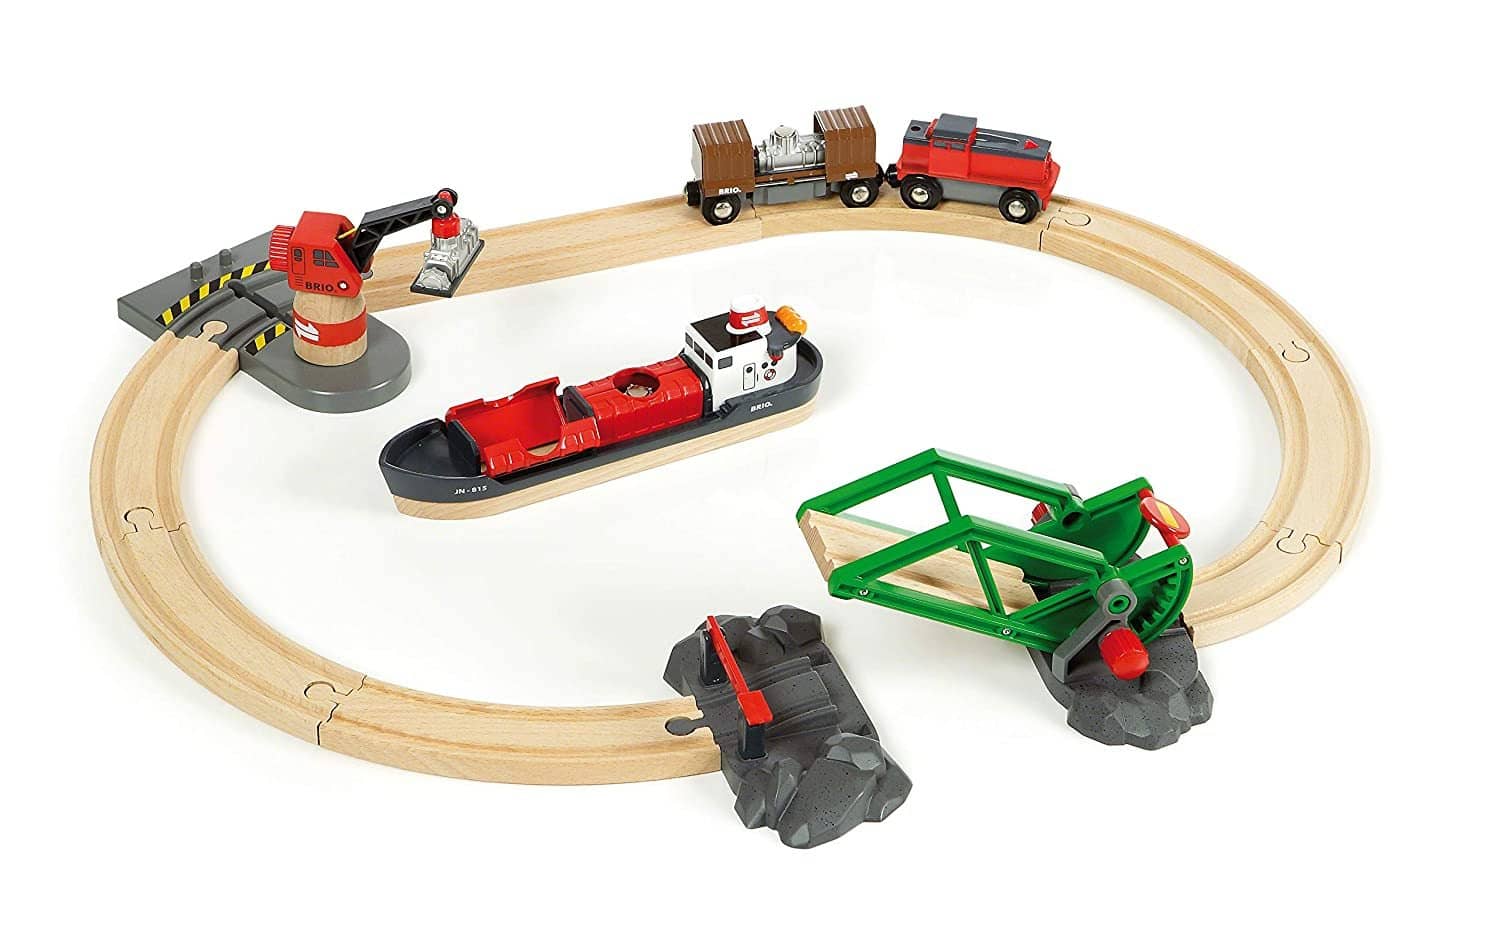 Brio World - 33061 Cargo Harbor Set | 16 Piece Toy Train With Accessories And Wooden Tracks For Kids Ages 3 And Up-Kidding Around NYC